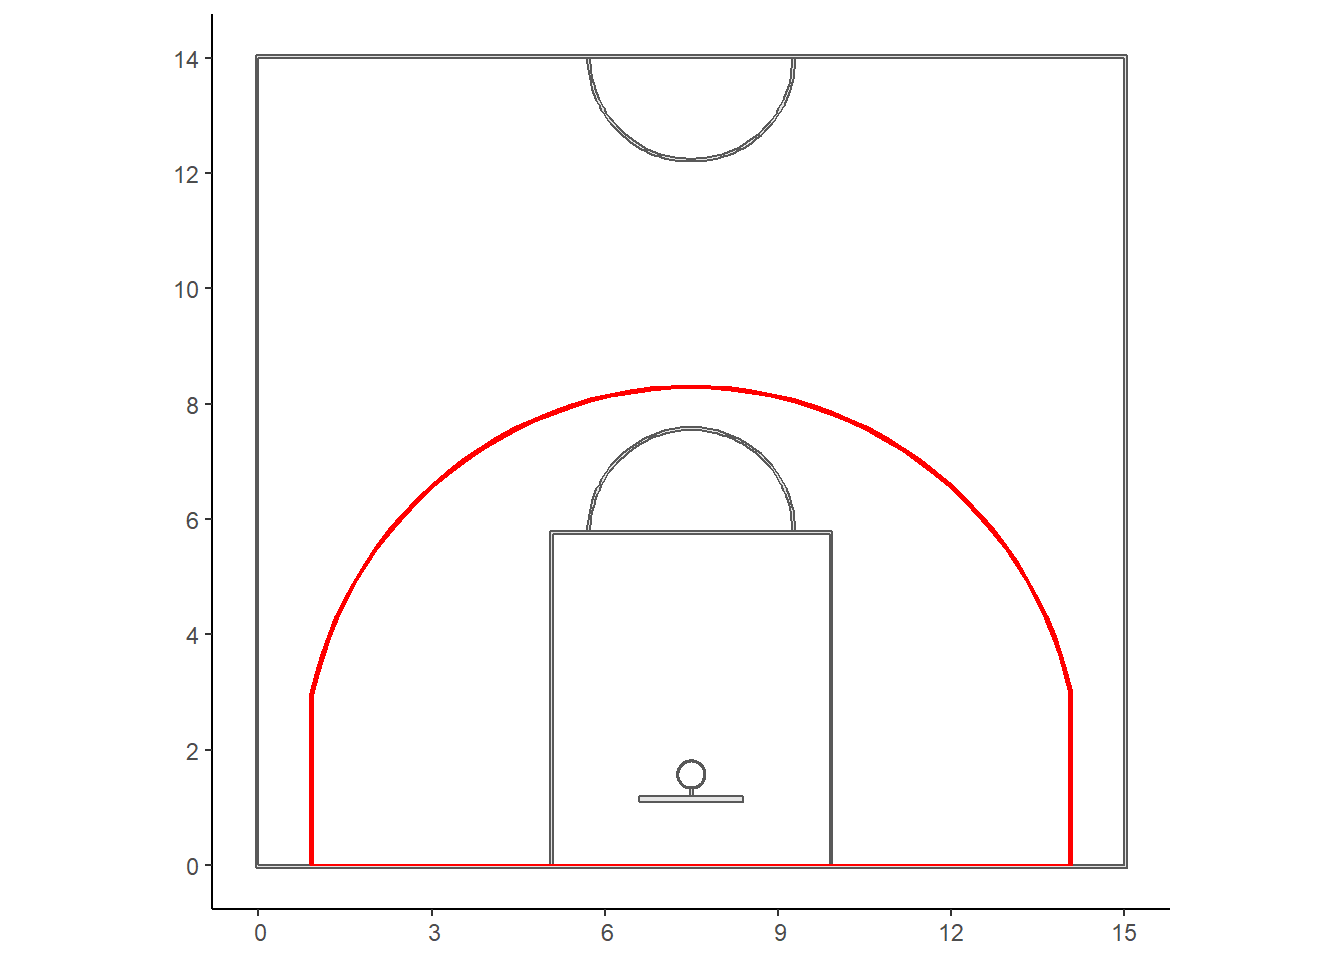 Plotting the three-point line in red